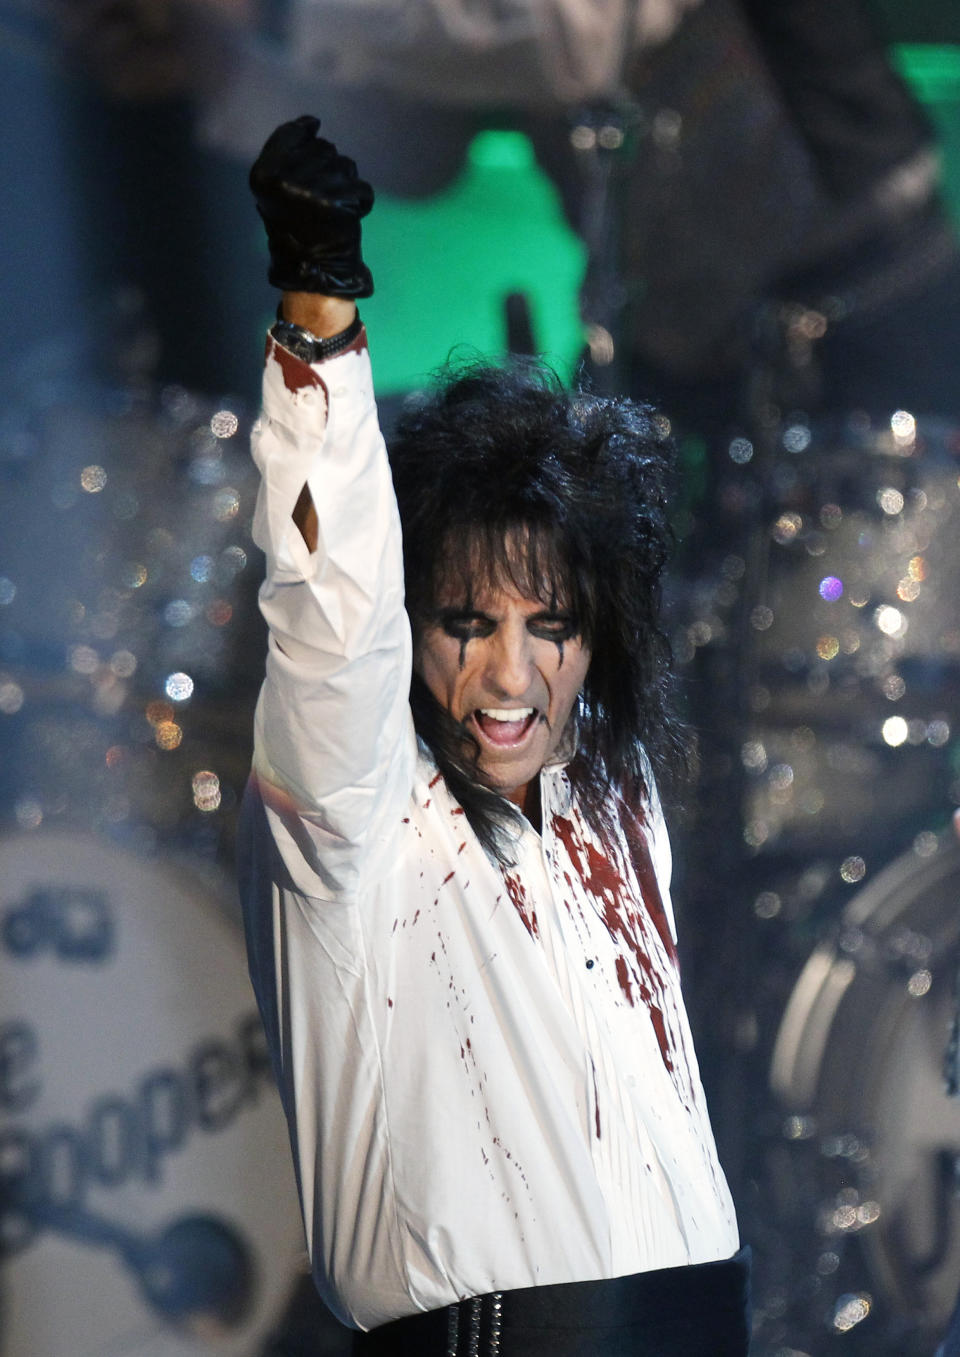 Singer Alice Cooper performs after being inducted during the 2011 Rock and Roll Hall of Fame induction ceremony at the Waldorf Astoria Hotel in New York March 14, 2011.  REUTERS/Lucas Jackson (UNITED STATES - Tags: ENTERTAINMENT)